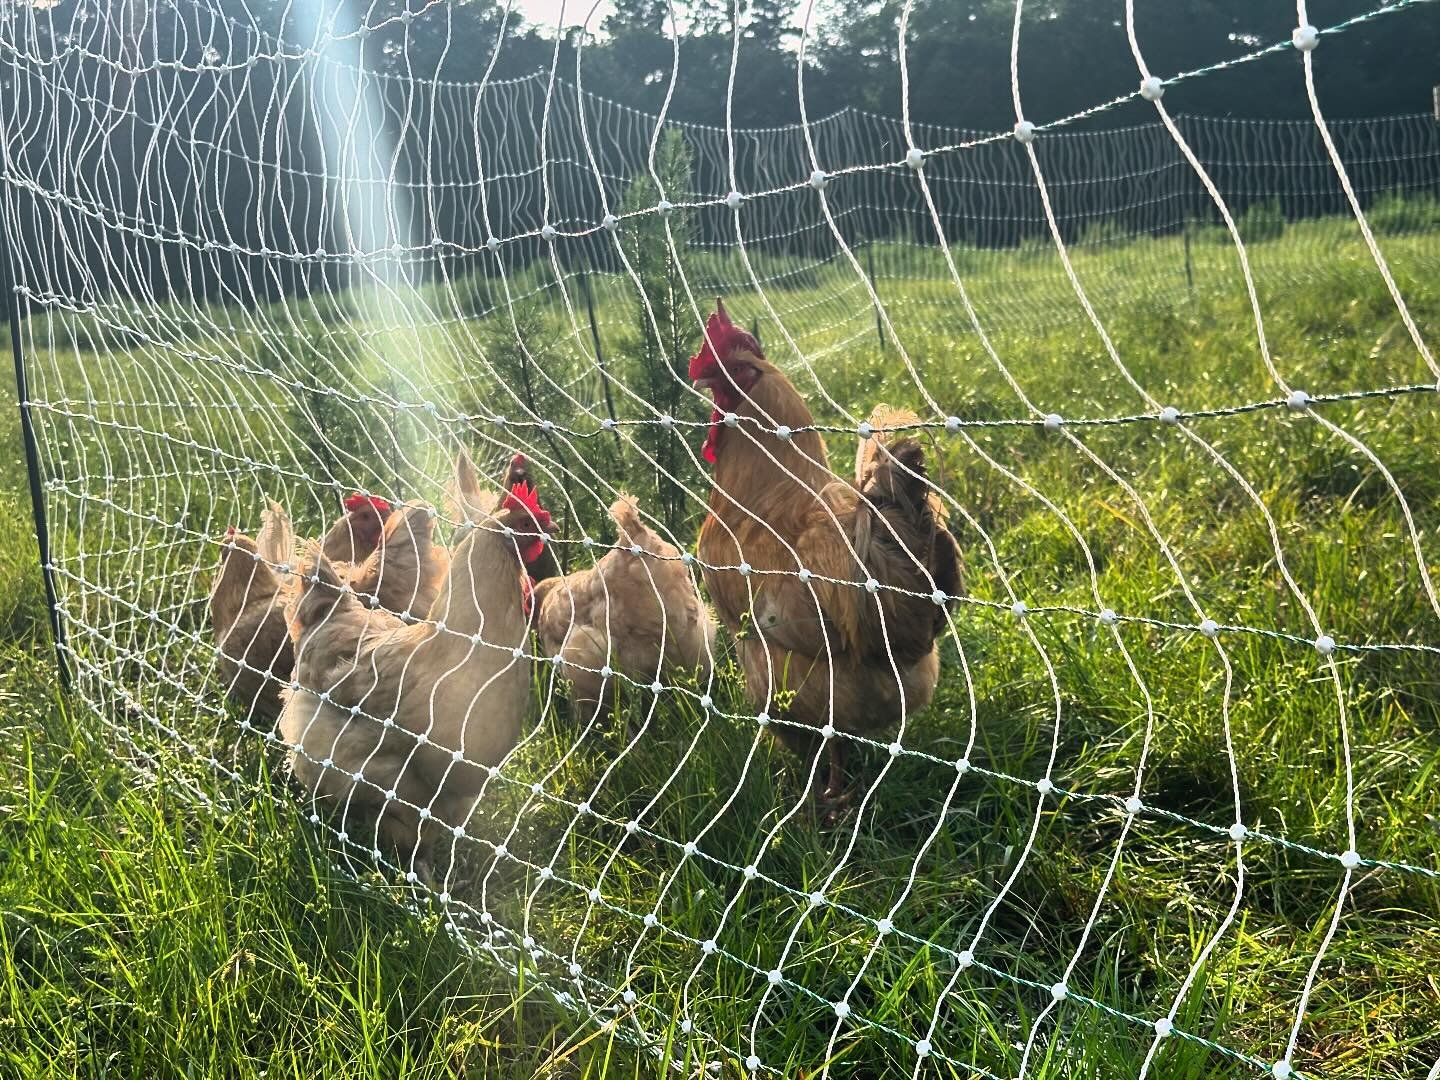 When you finally install poultry netting and the flock immediately shows their appreciation 🐓🌱#pasturedpoultry #poultrynetting #bufforpington @premier1supplies